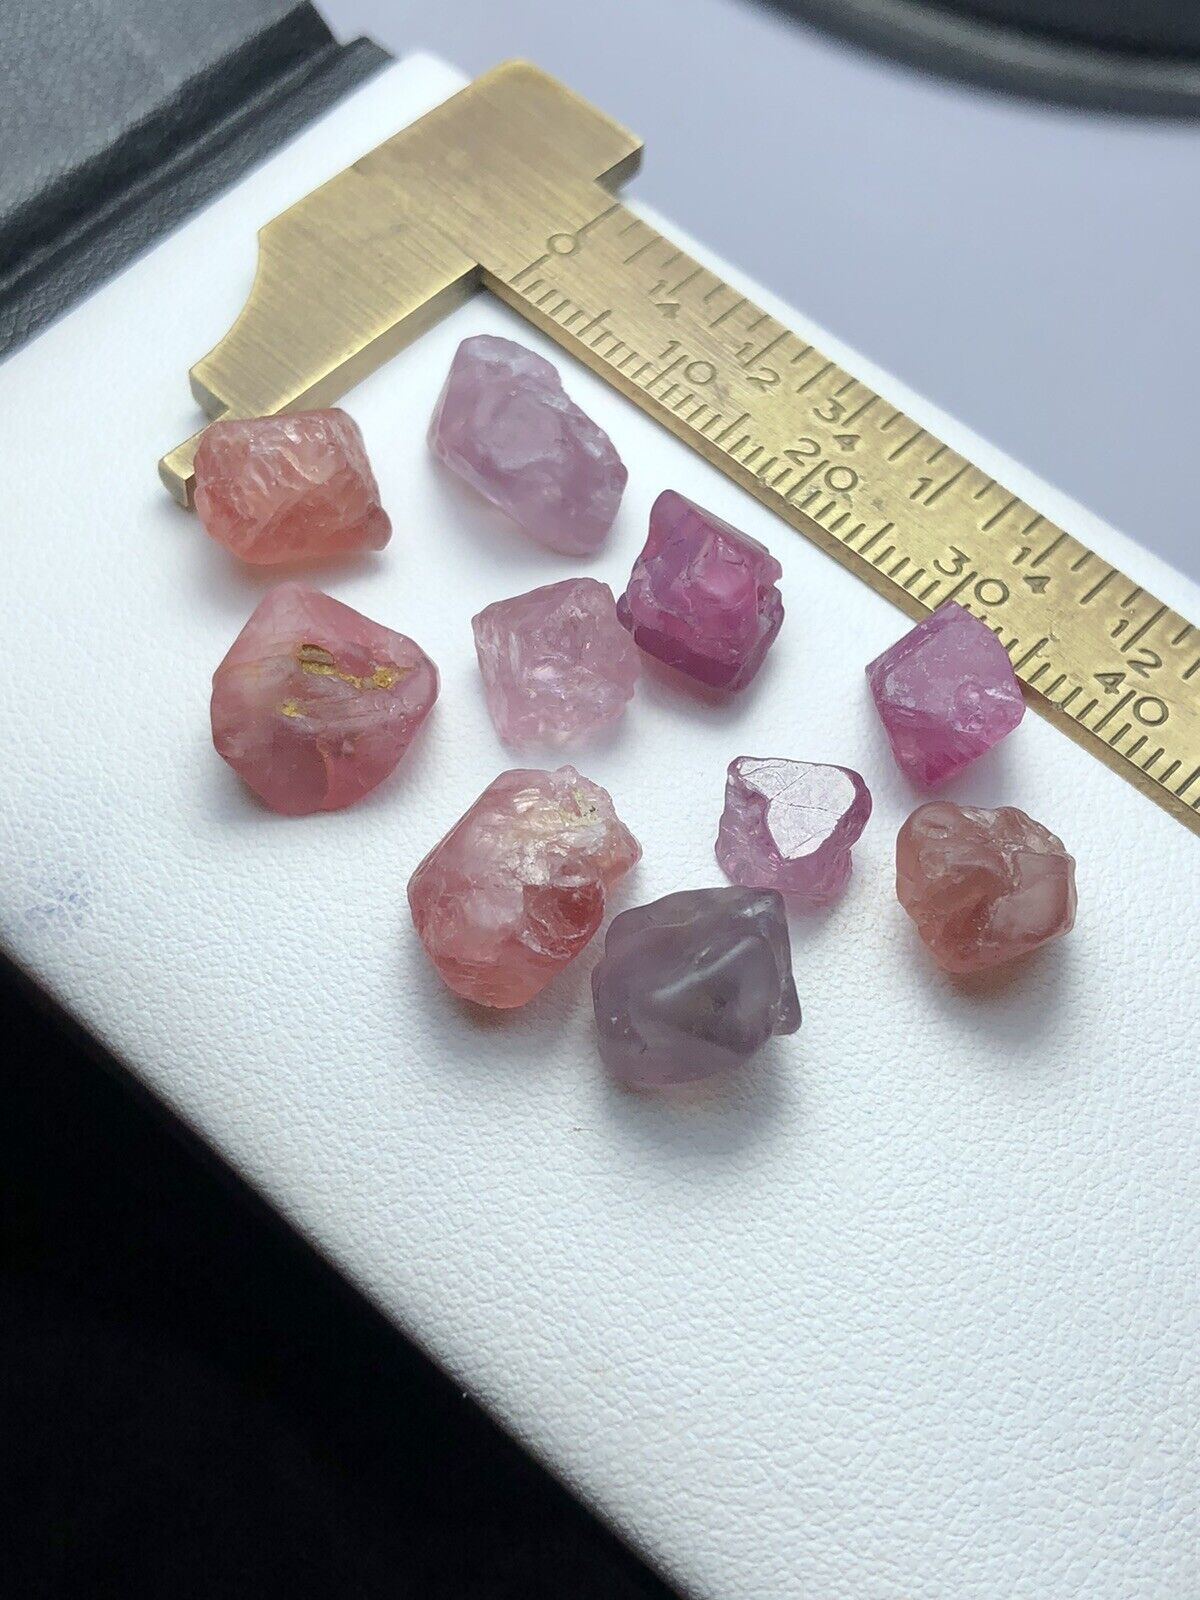 50 Crt / 10 Piece /Natural Multi Spinel quib Crystals From Burma Mine.